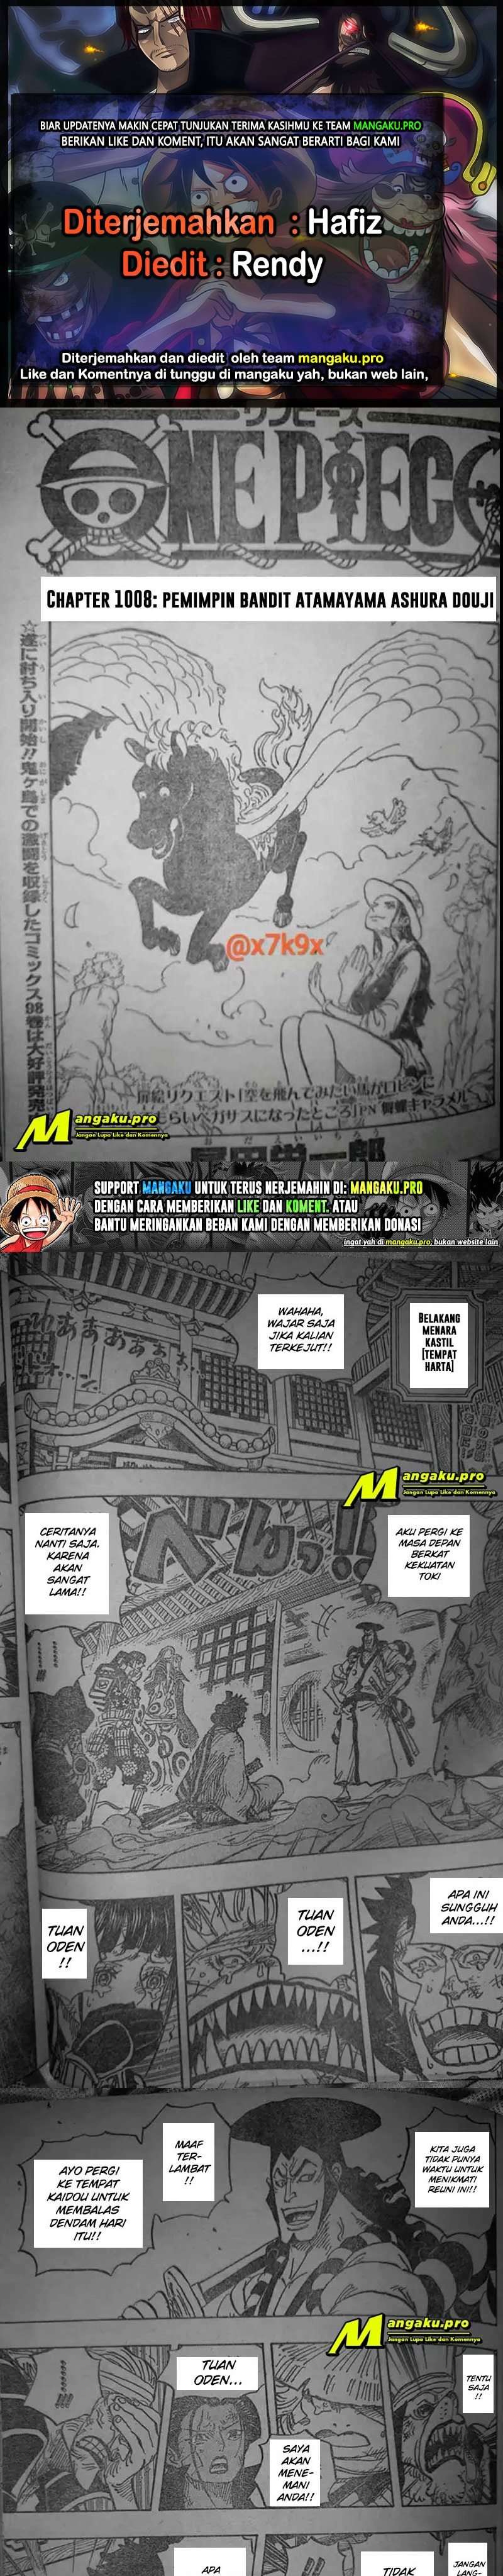 One Piece Chapter 1008 Lq - 31